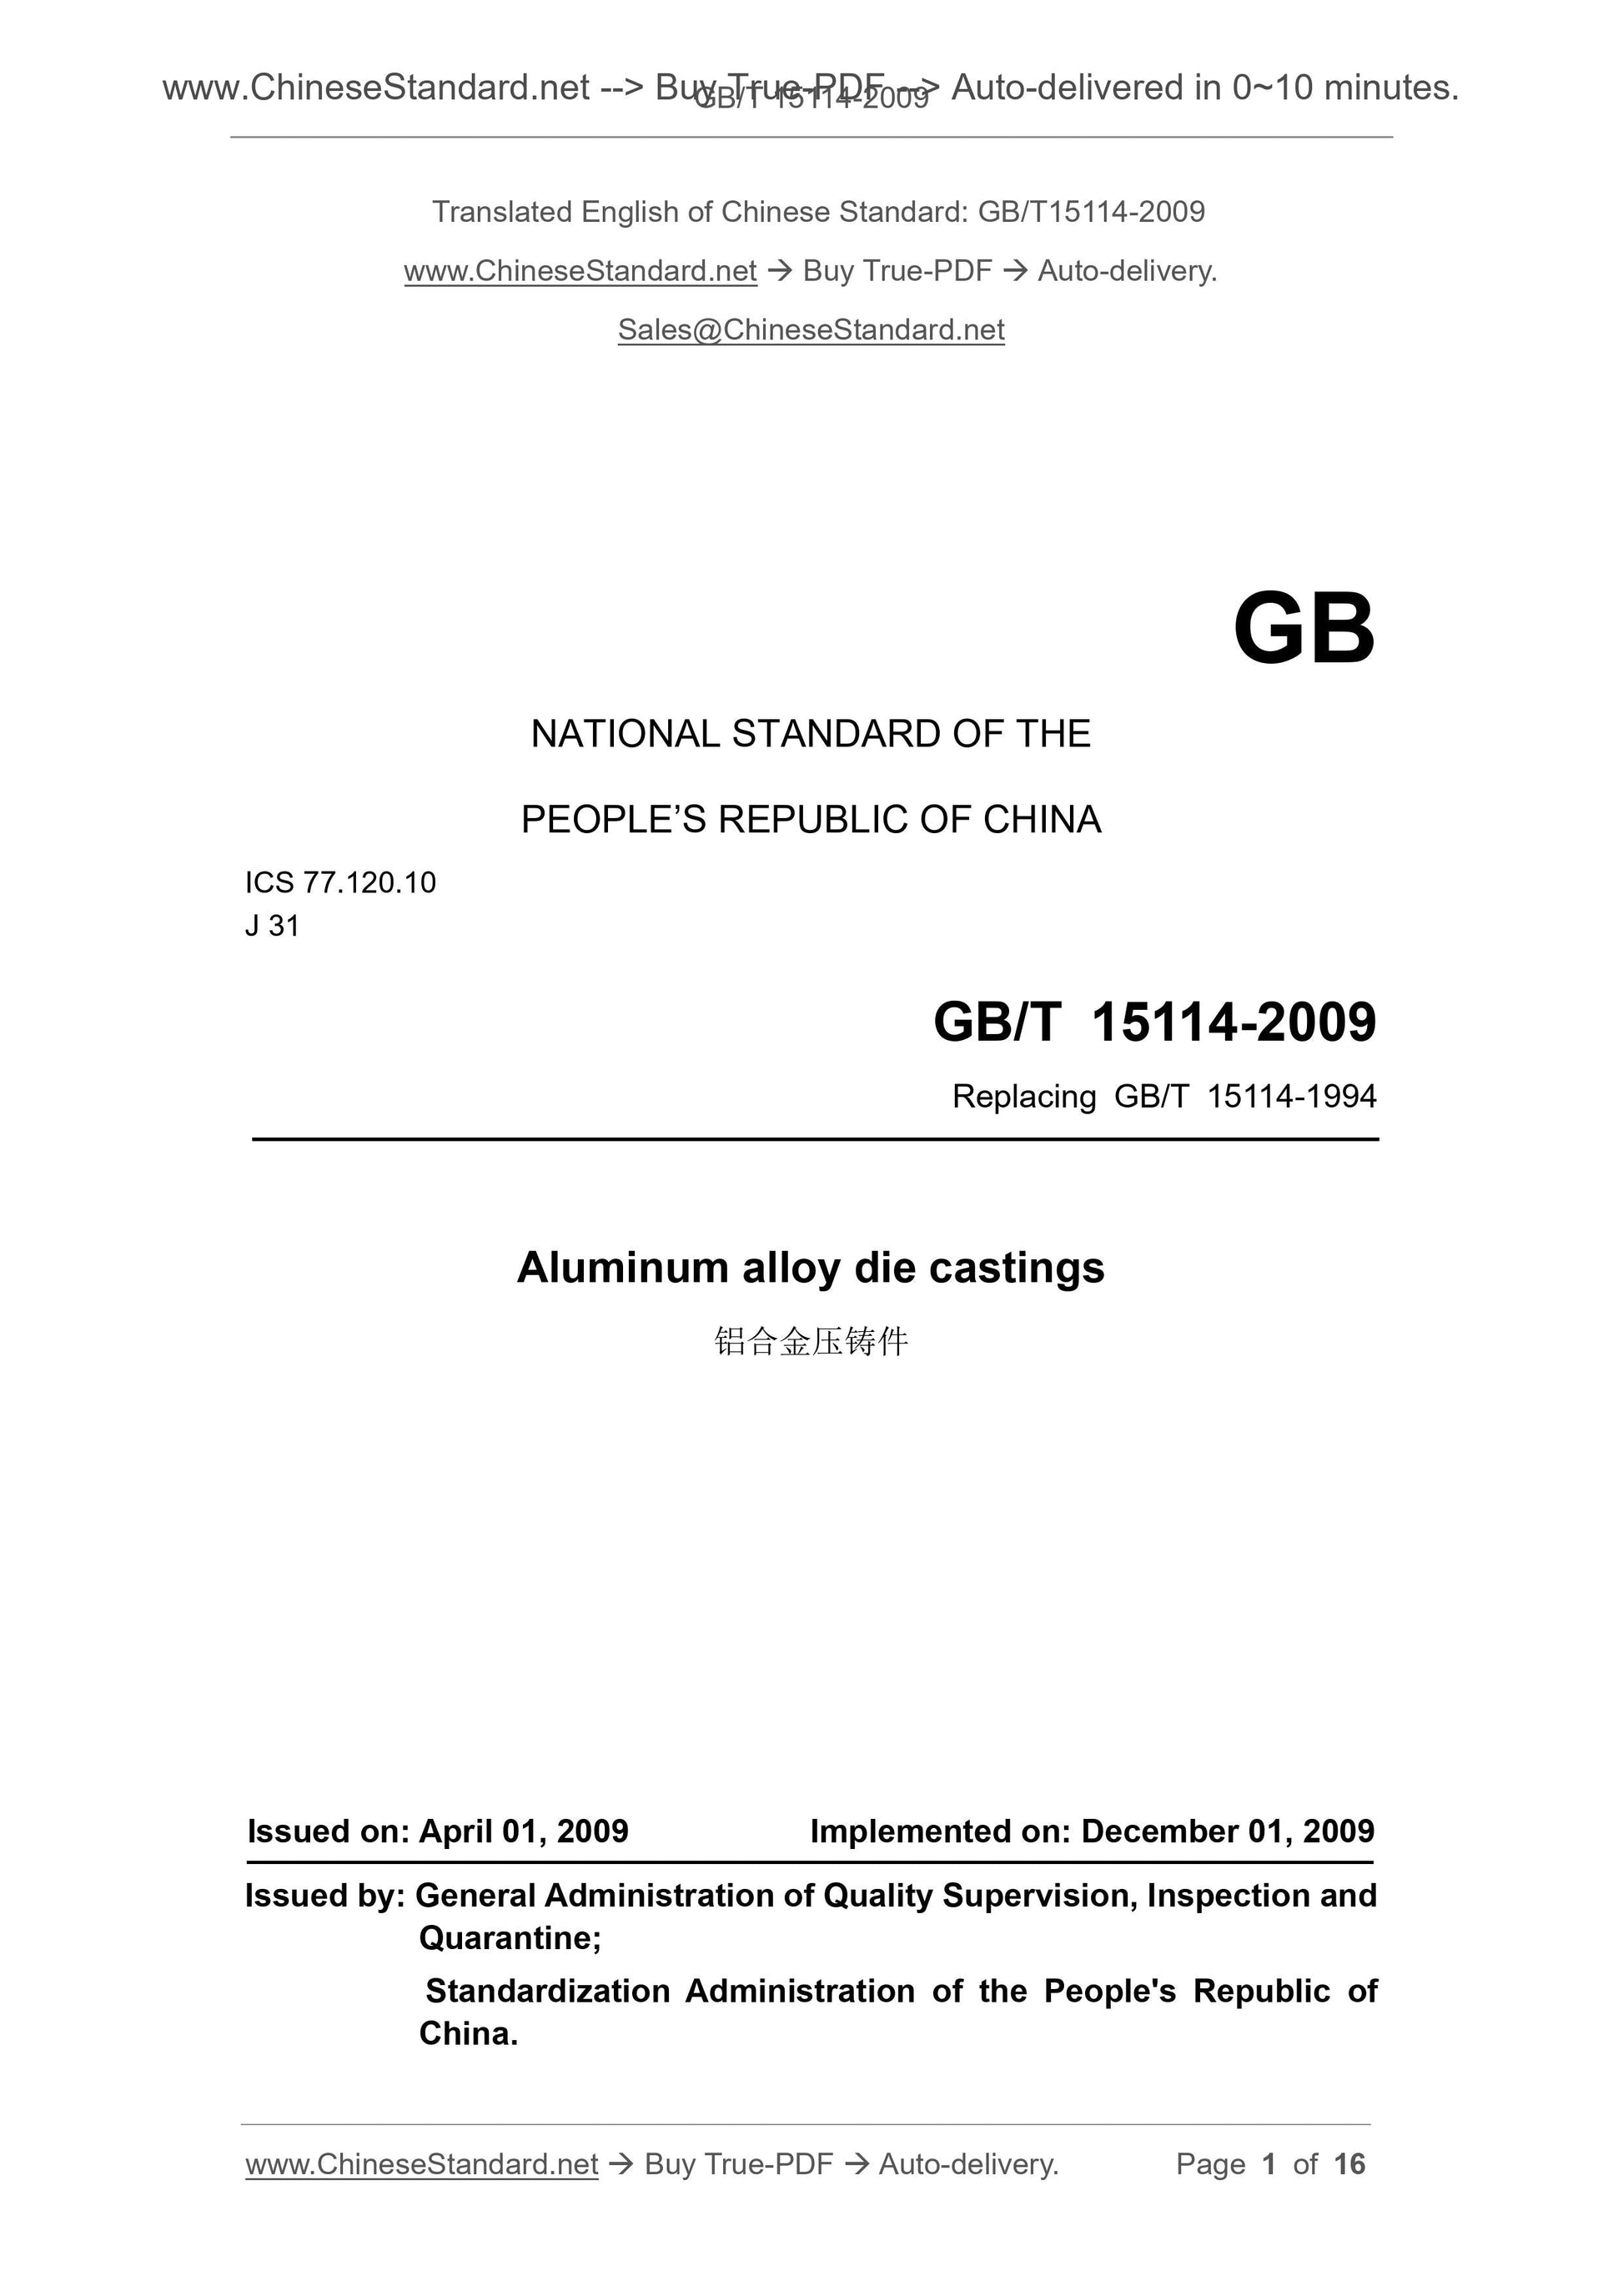 GB/T 15114-2009 Page 1